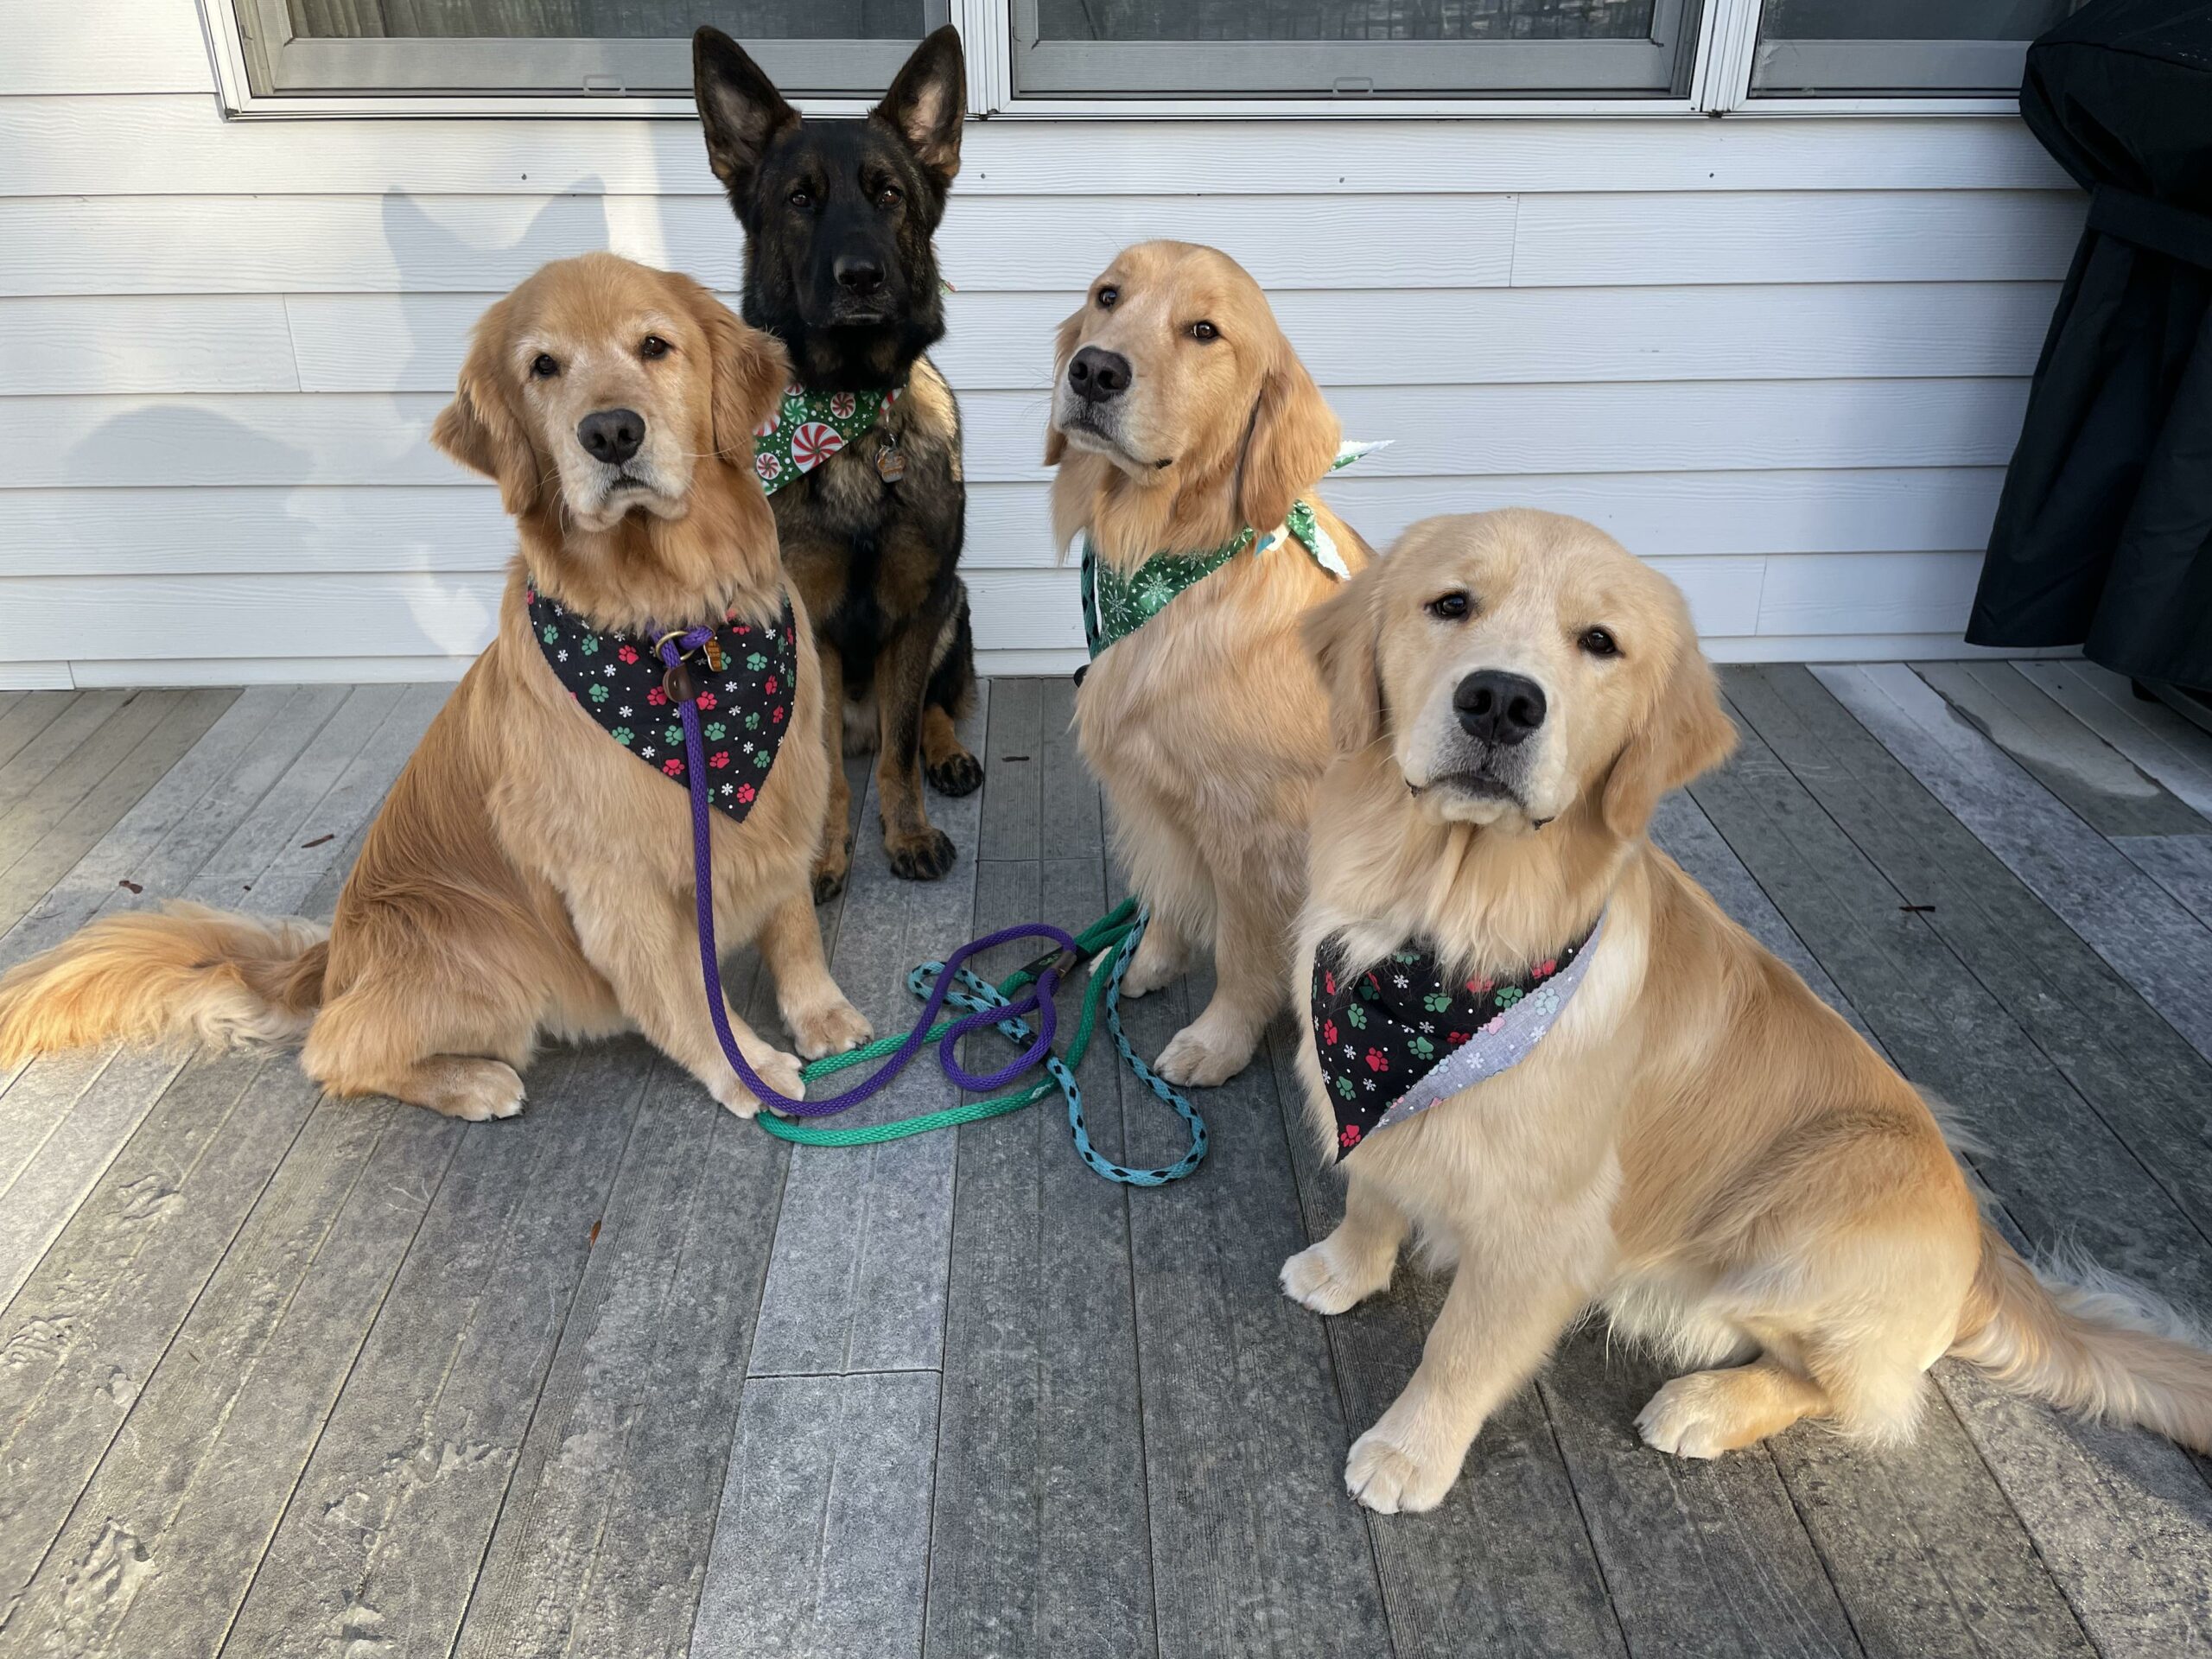 4 dogs after grooming